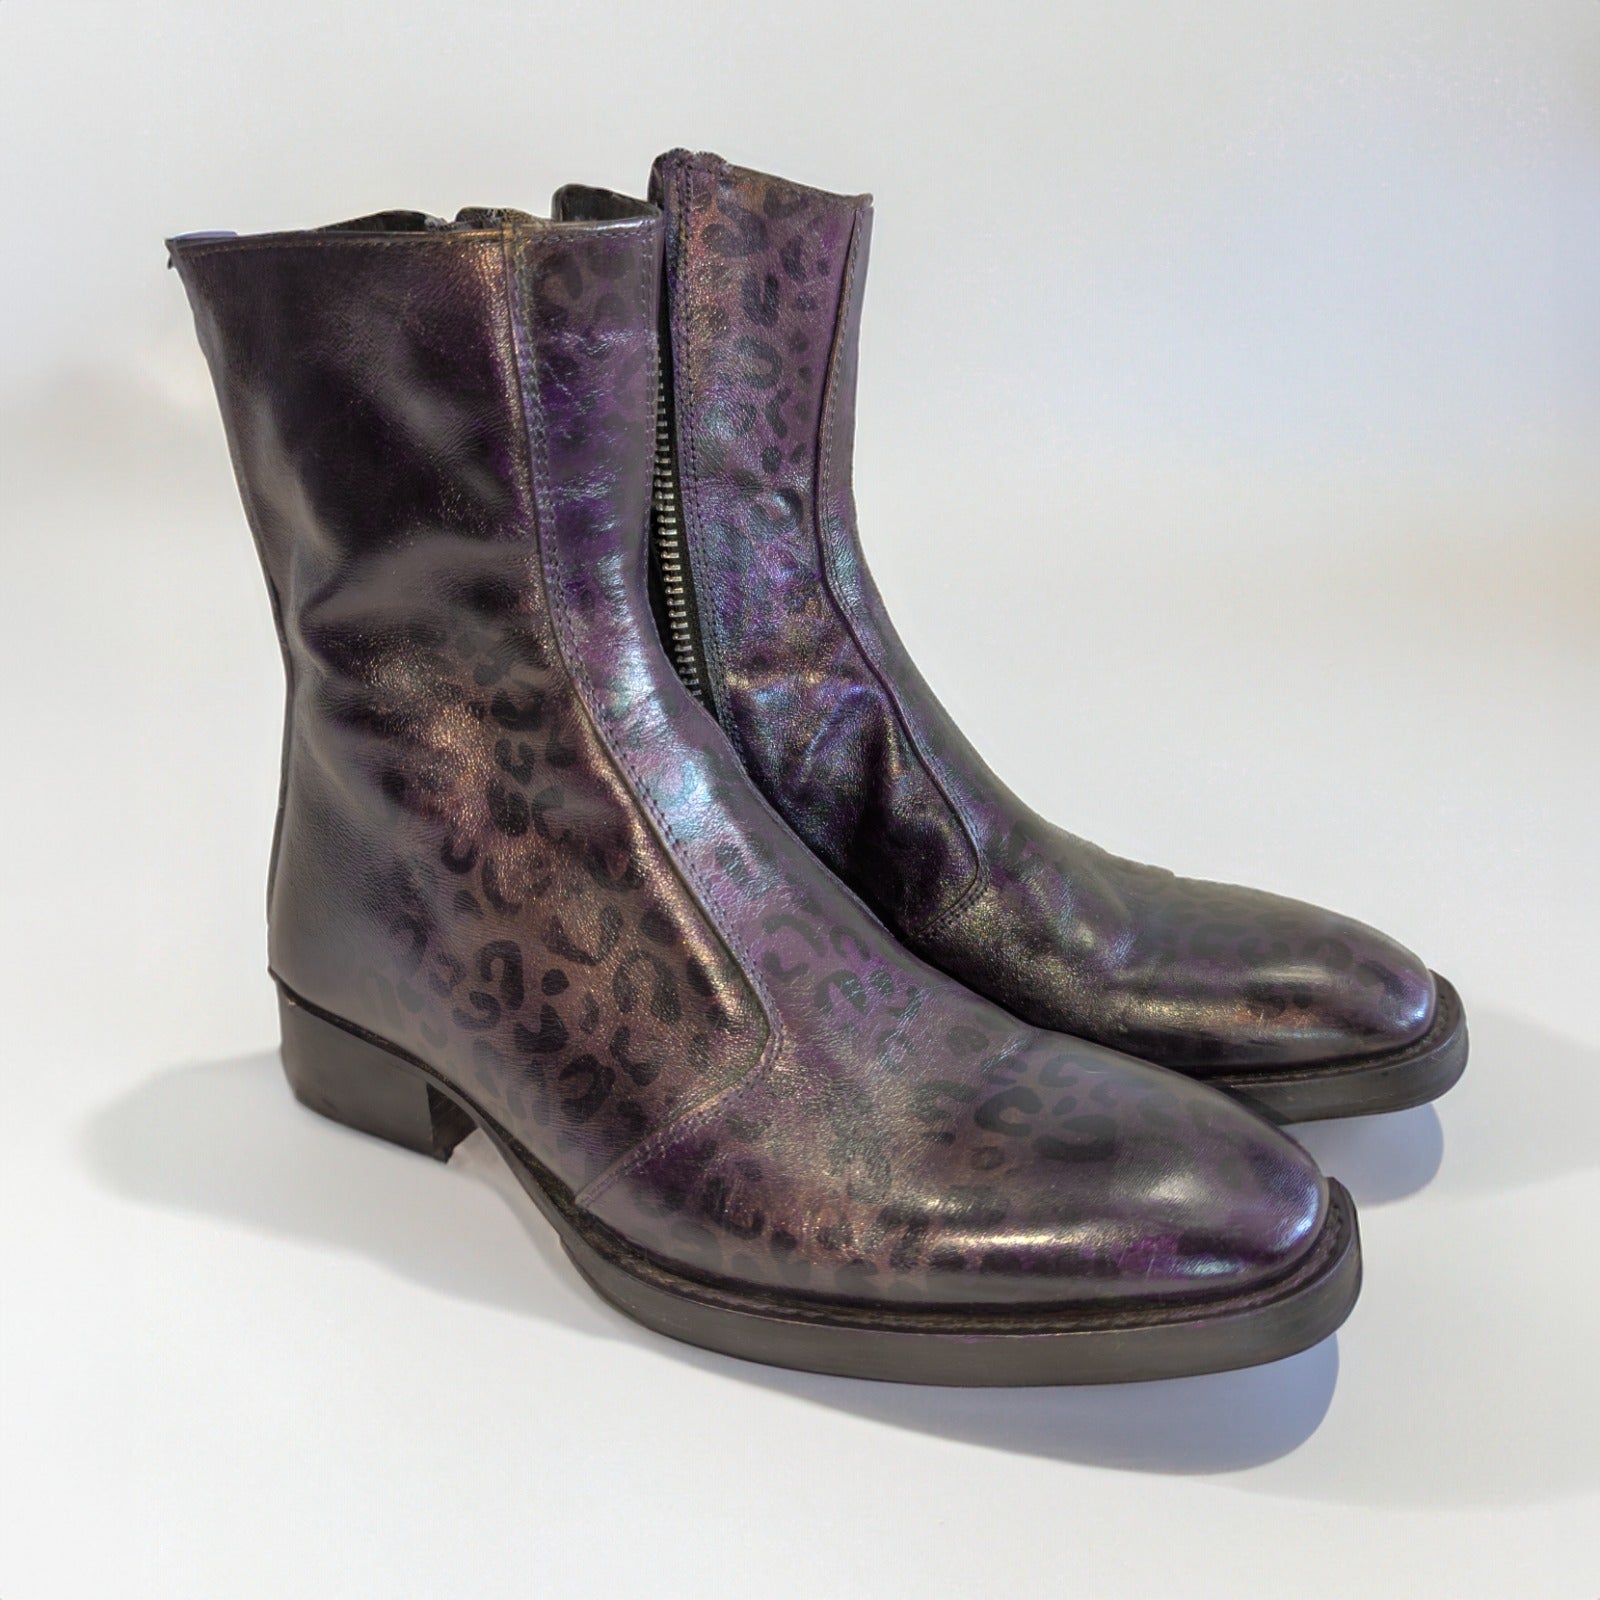 THE MORRISON BOOT COLLABORATION WITH AARON LECESNE/STARBENDERS